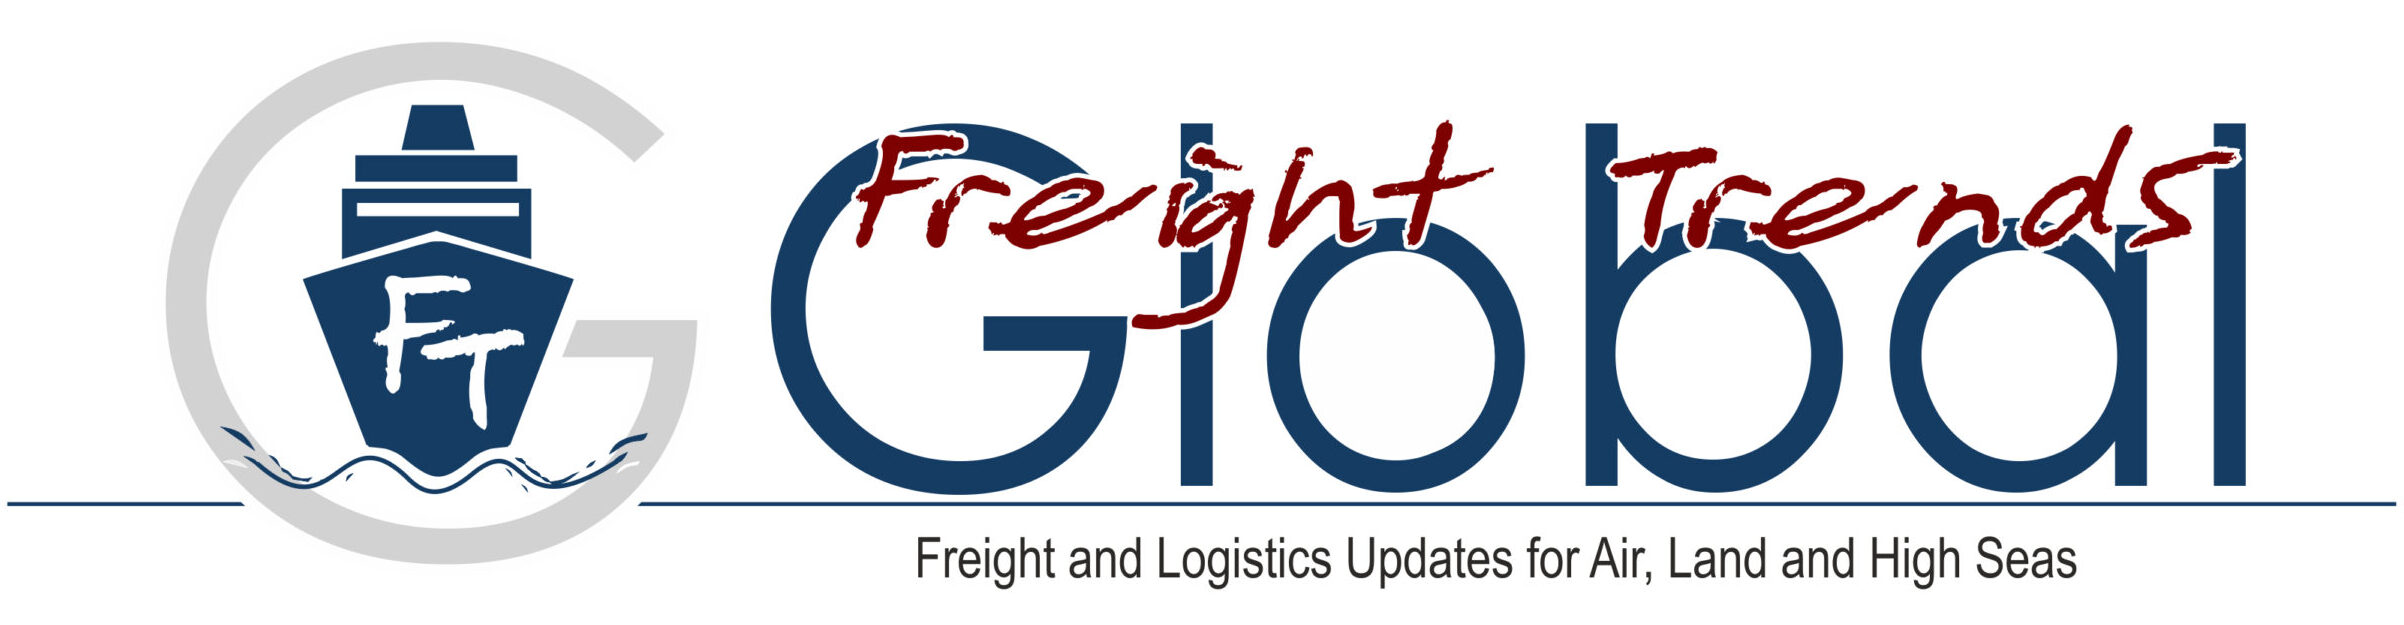 Freight Trends Global